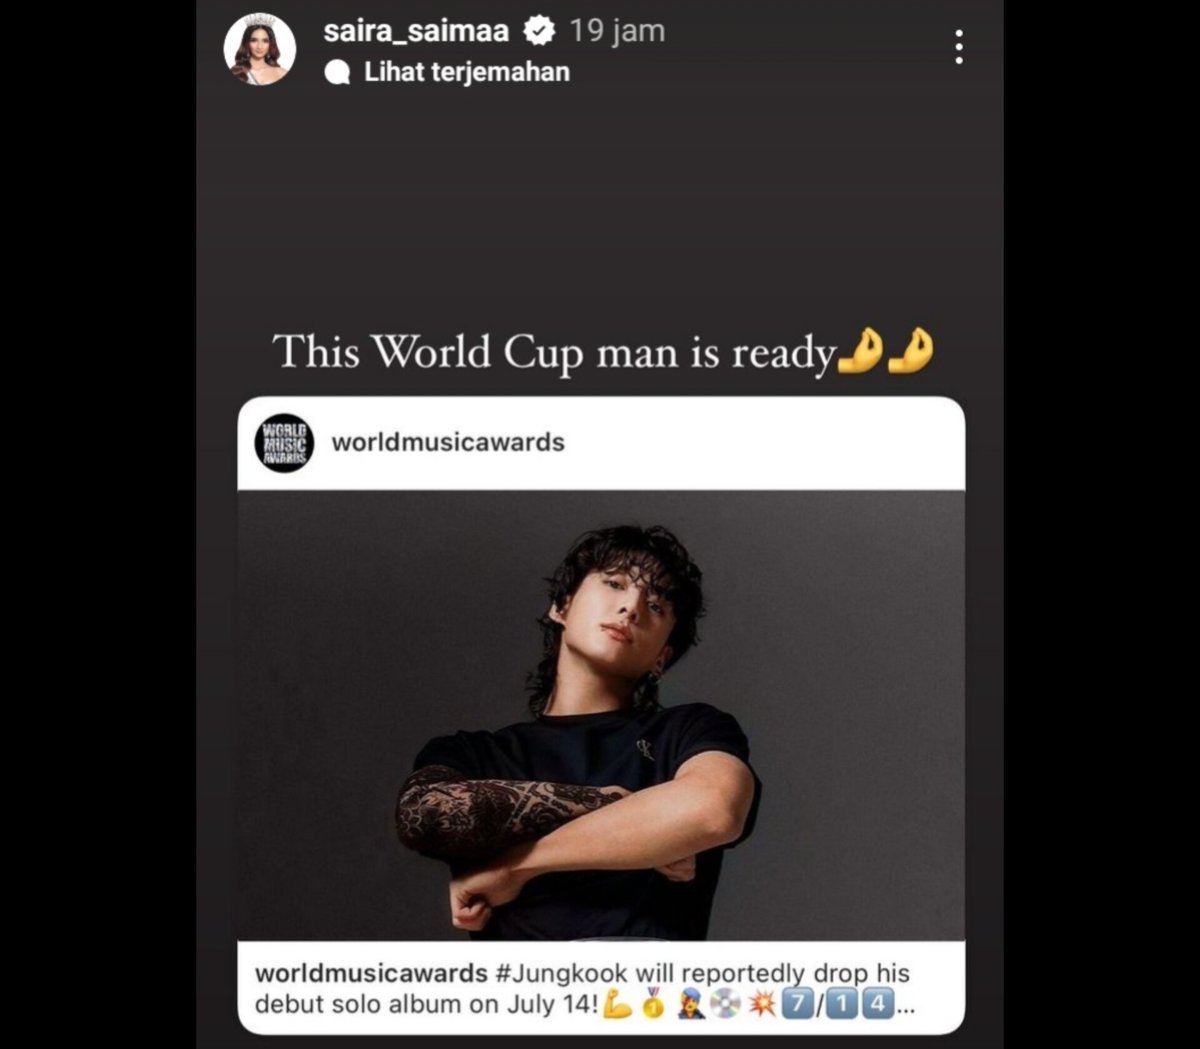 Actress #SairaSaimaa, Miss Earth Indonesia 2020 & #MissIndonesia for DKI Jakarta 2022 shared WMA's post on #Jungkook's hugely awaited upcoming solo album in her Instagram story with the caption: “This World Cup man is ready🤌🤌” 👨‍🎤💥💿🔥👑🤍